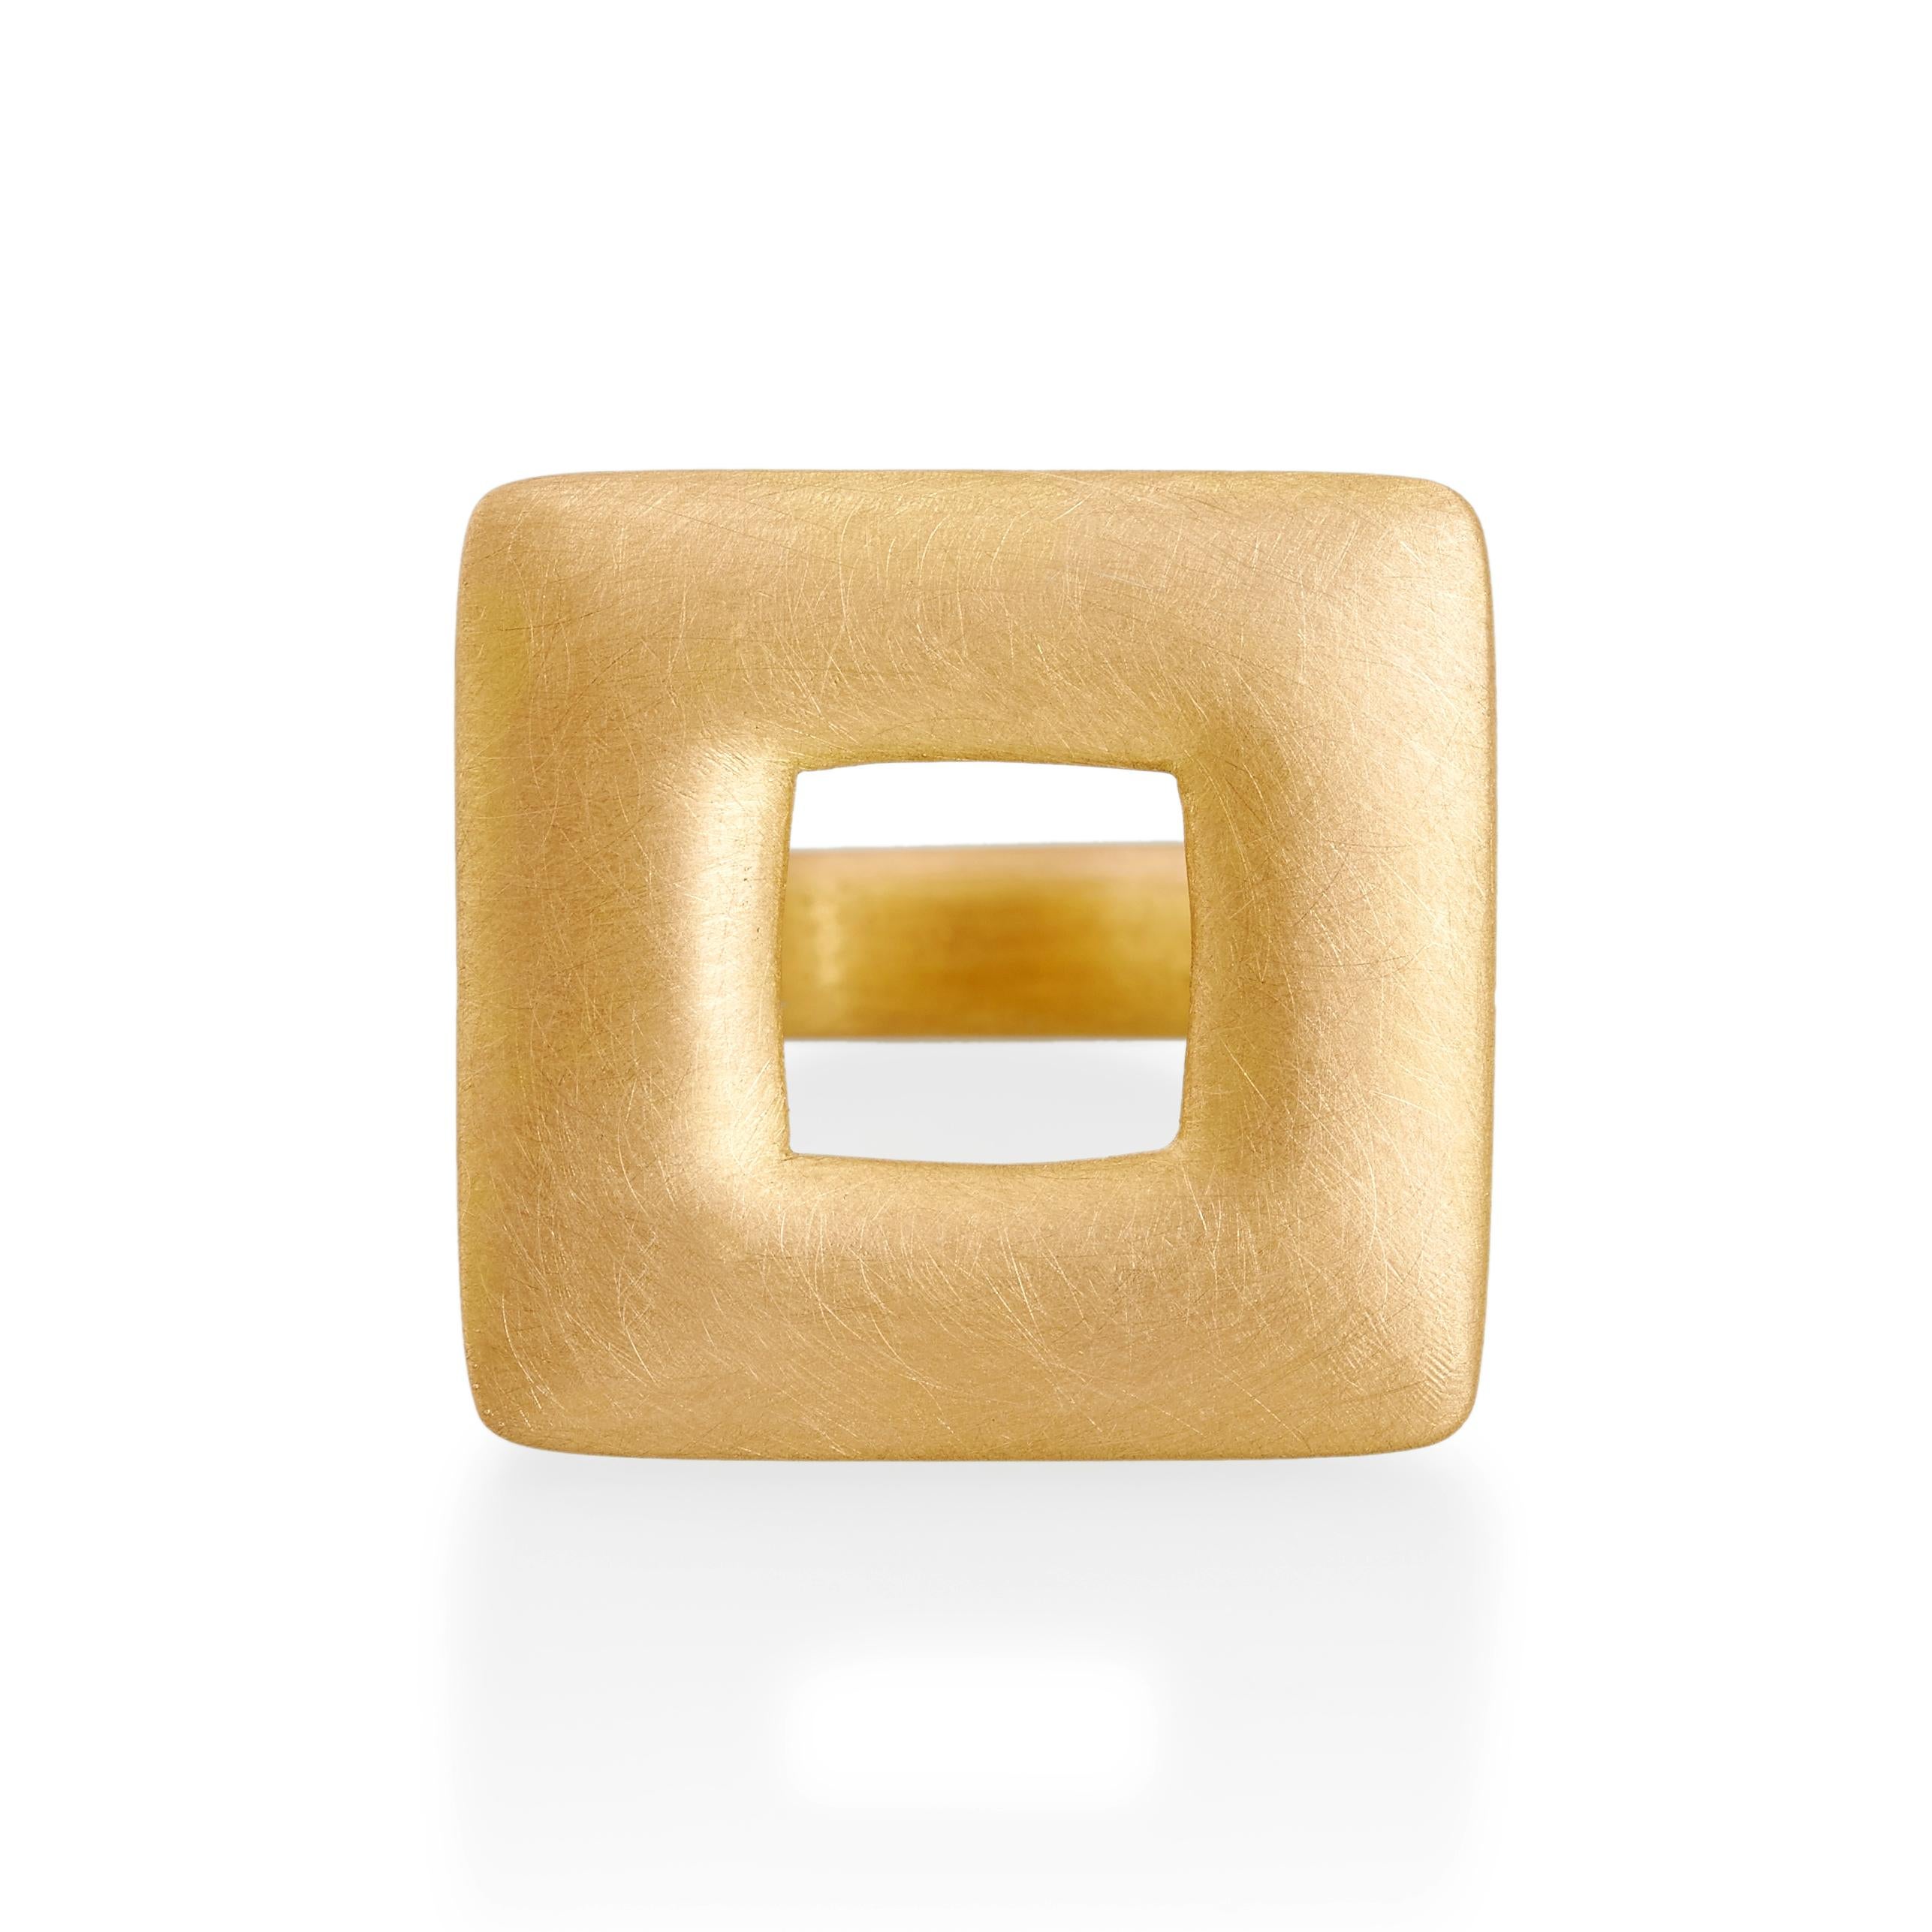 Hand carved large square ring in solid 22ct gold with a matte finish. Strong contemporary design and selected as 'Object of the Day' at Goldsmiths' Fair by Boodles.

ref: S17004

24mm square  
22ct gold

Cadby & Co are a family business that